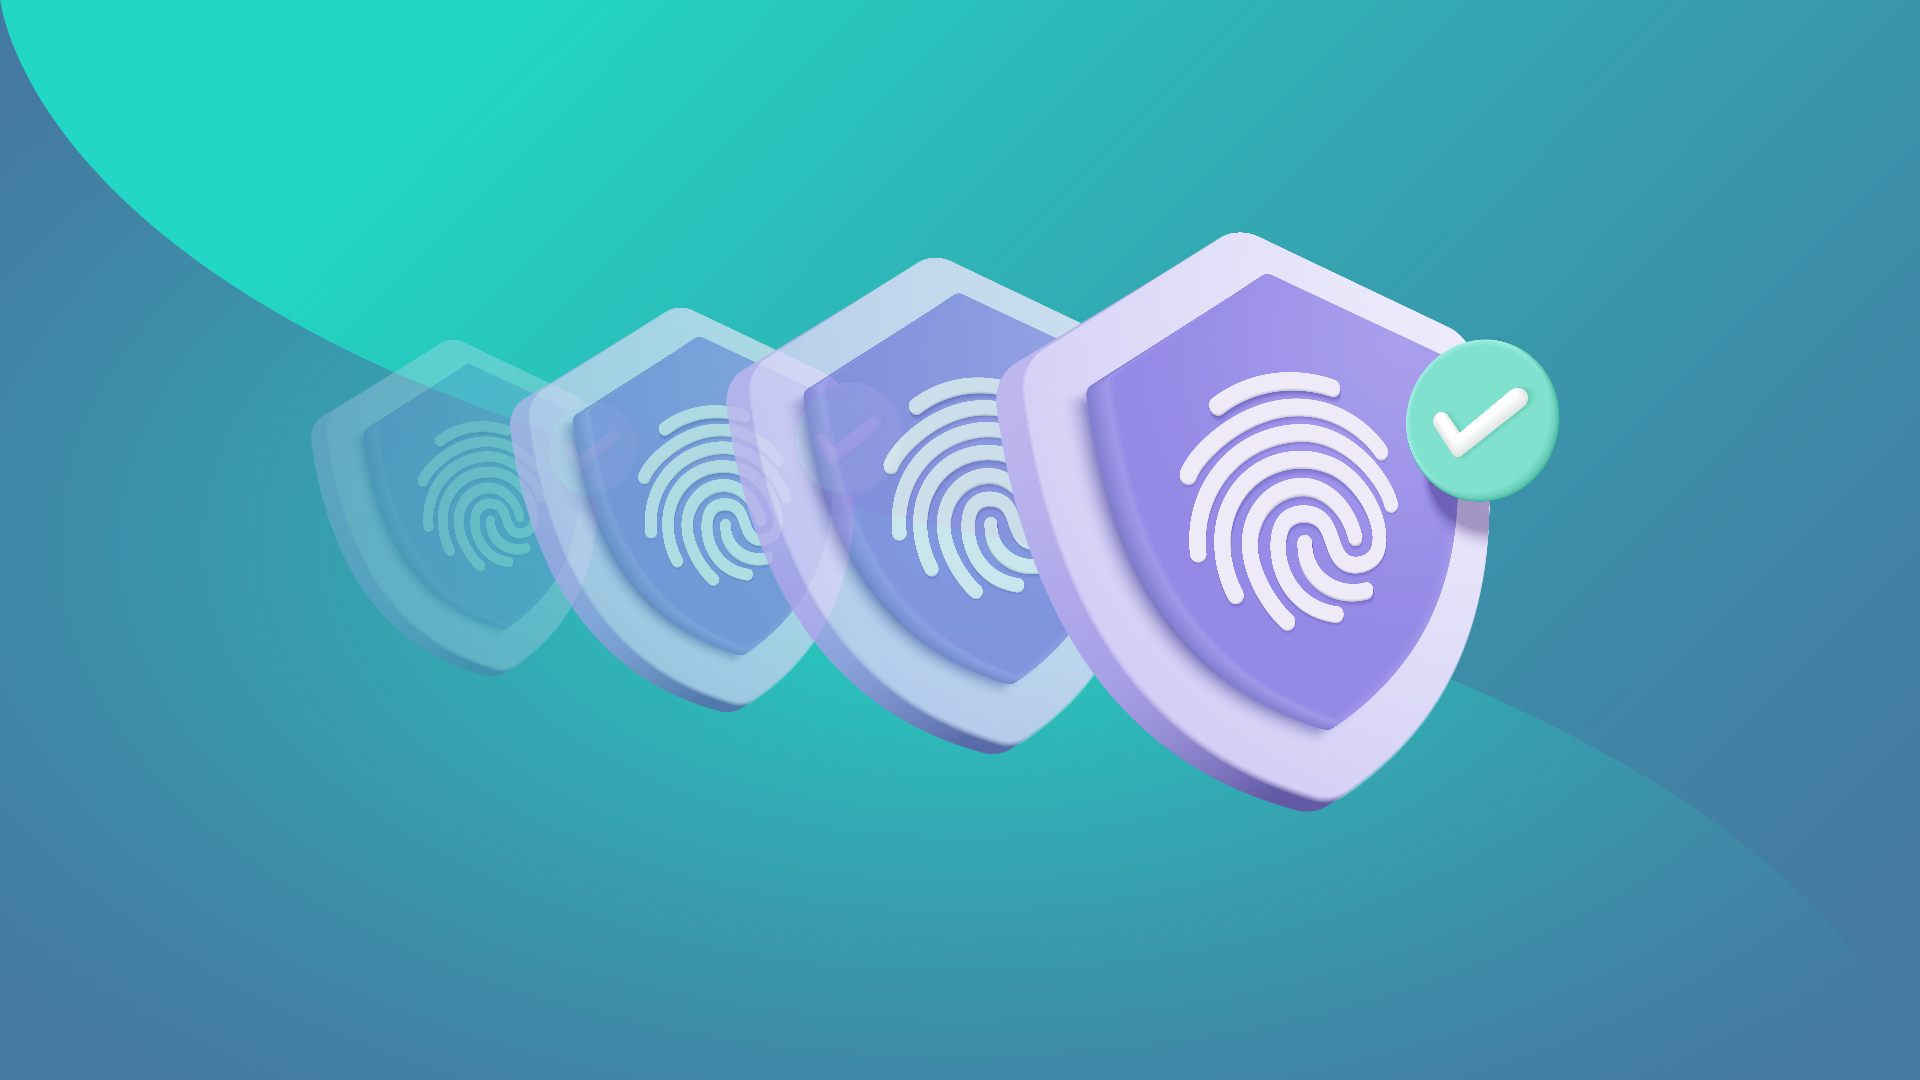 Illustration representing multi-factor authentication for online banking security